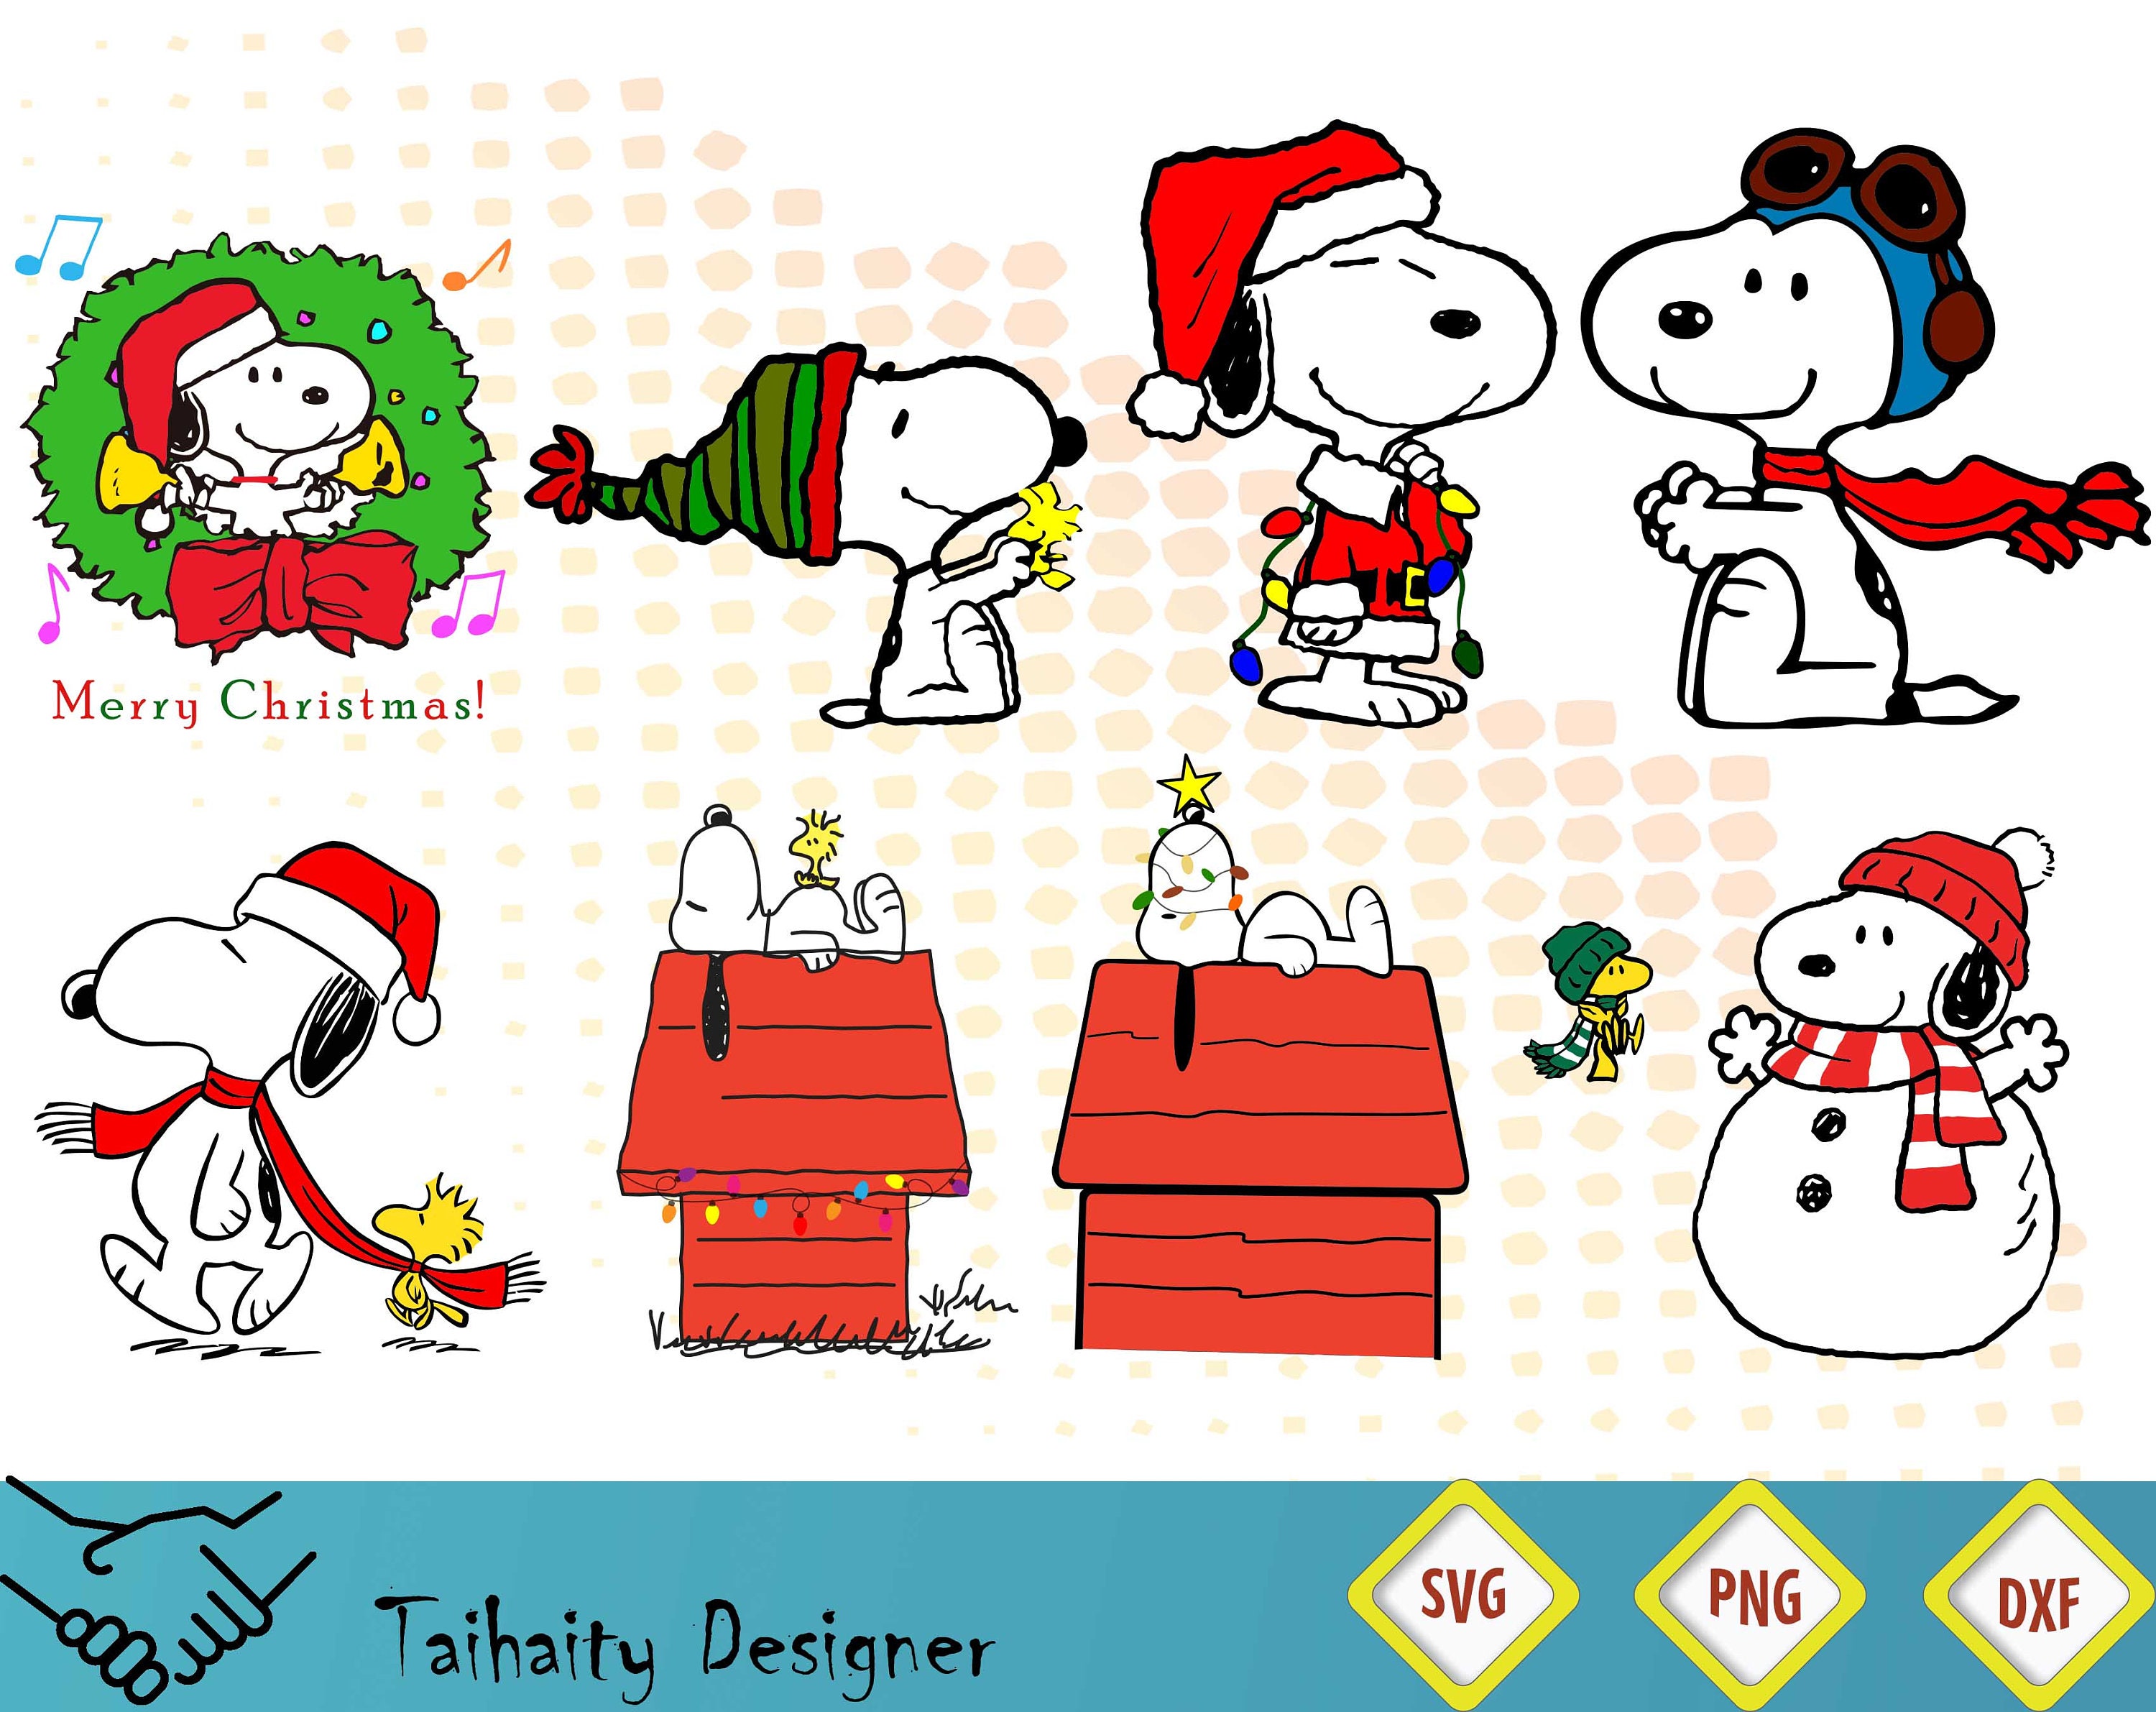 Download Snoopy Christmas Svg-Datei / Snoopy Svg Dxf Png ...